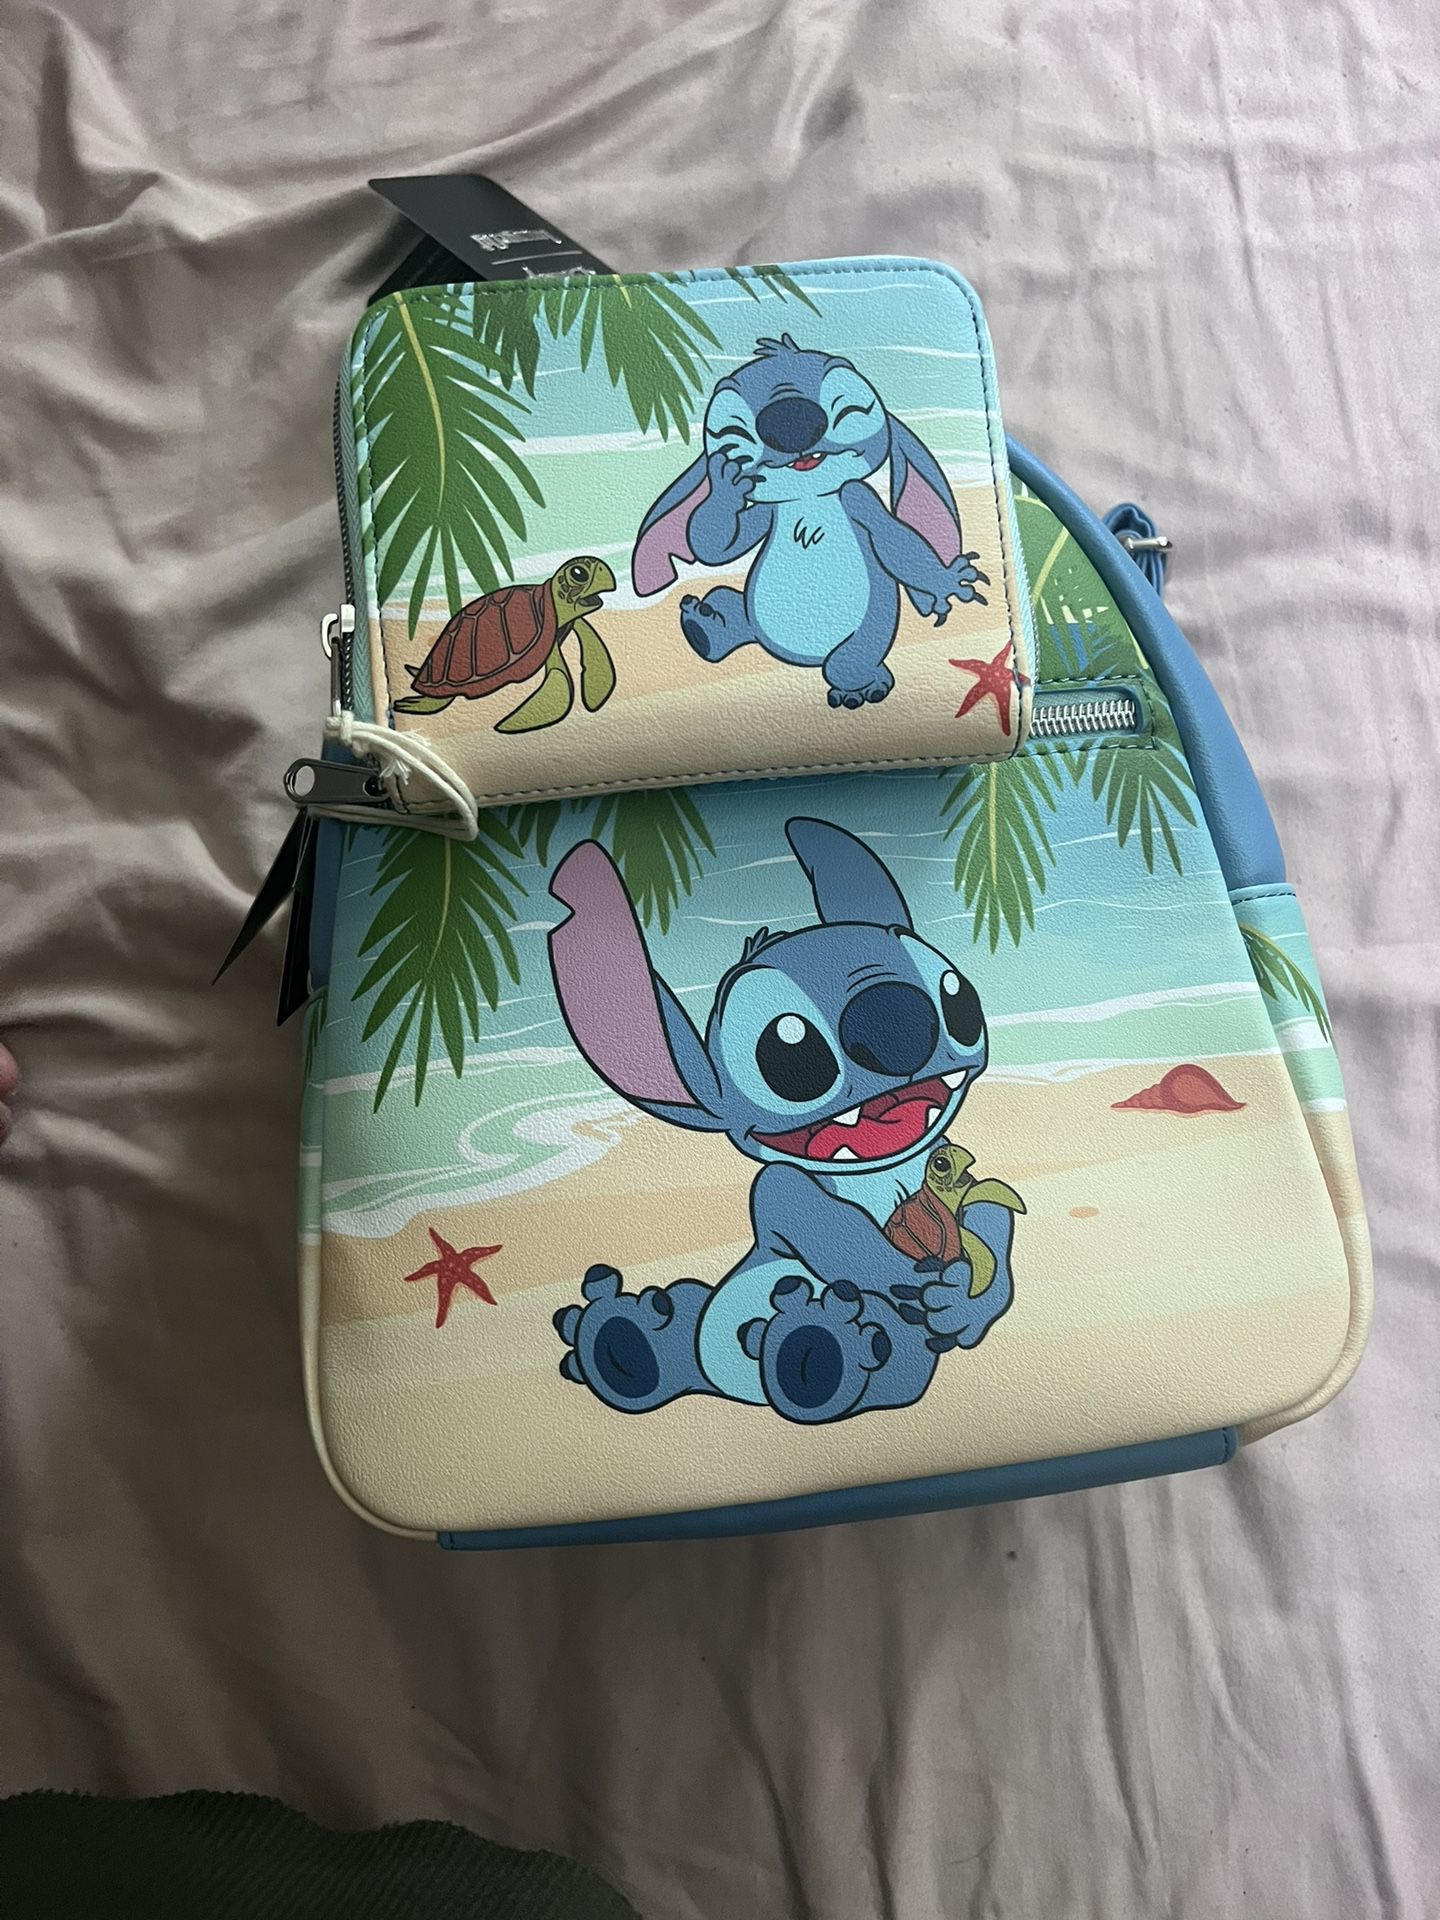 Loungefly Disney: South Western Mickey Cactus Mini Backpack - Merchoid